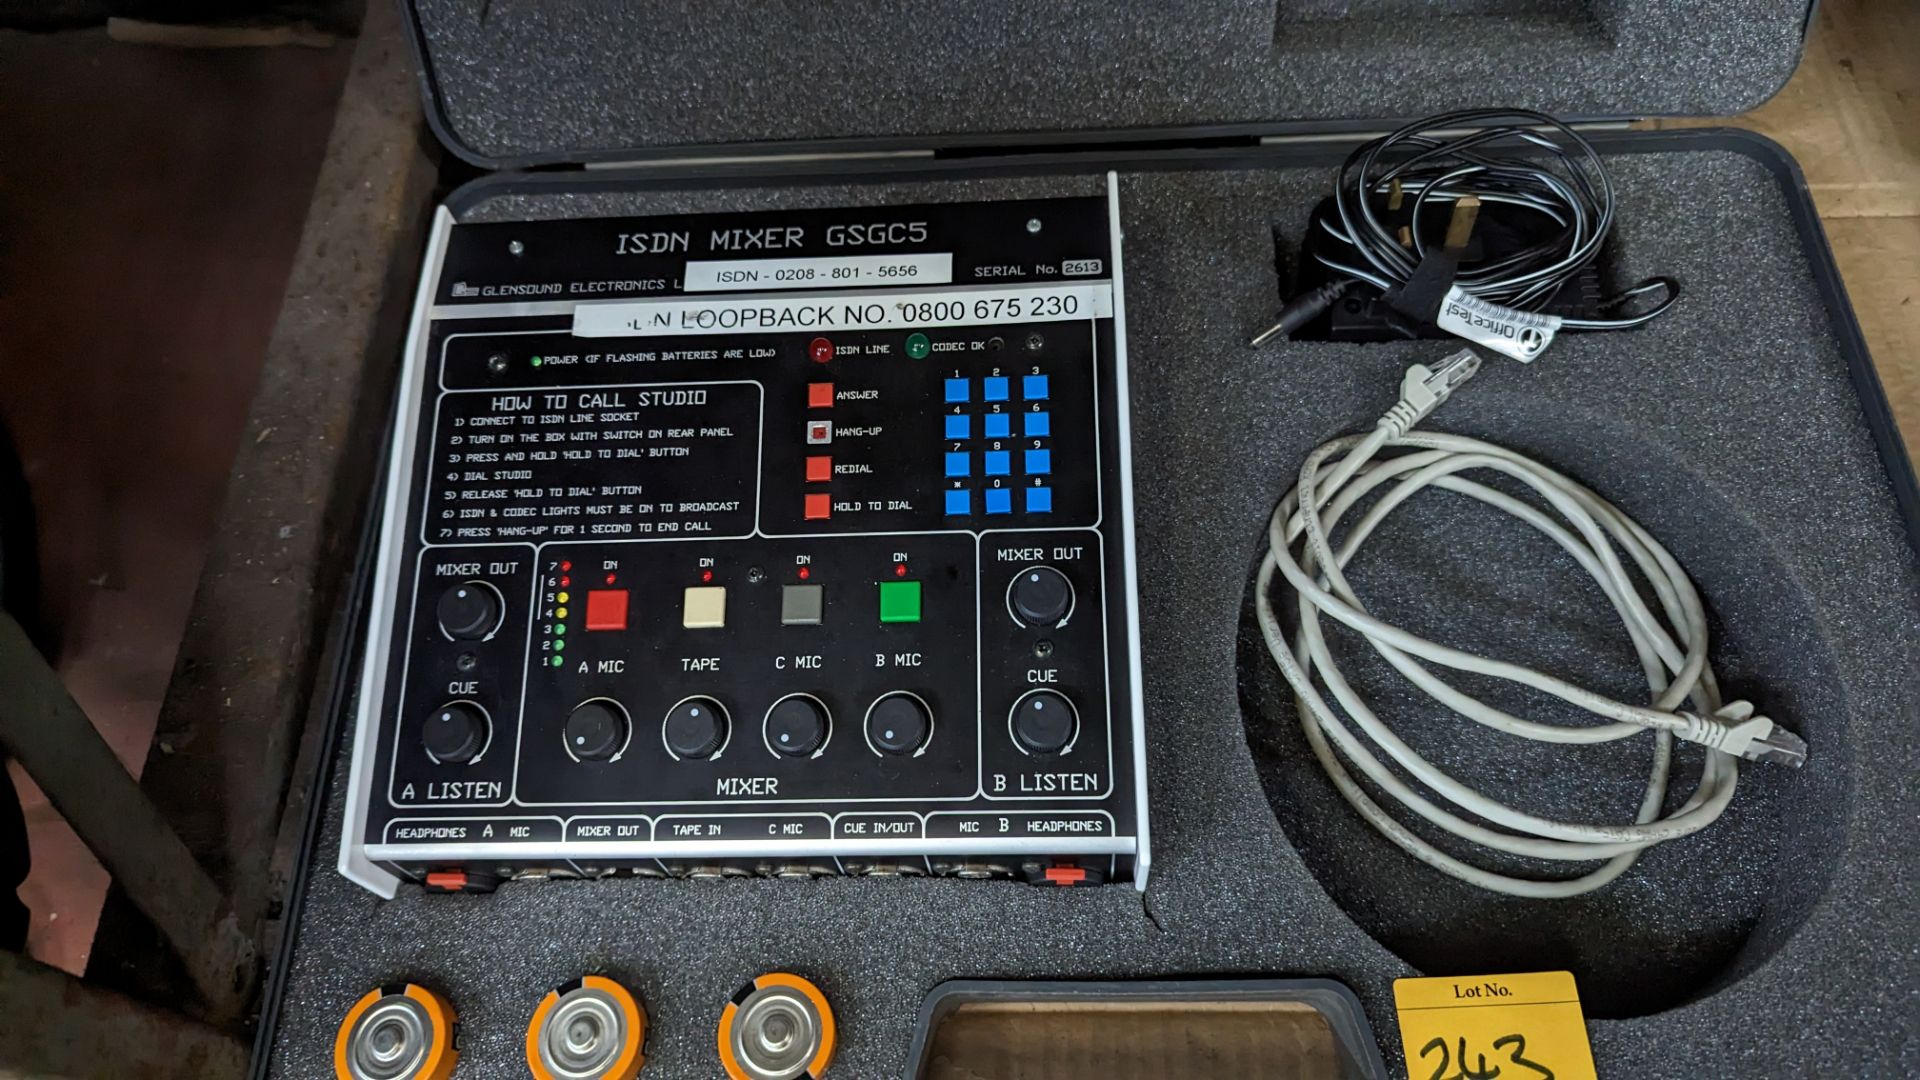 Glensound ISDN mixer, model GSGC5. Includes carry case and ancillaries - Image 6 of 9